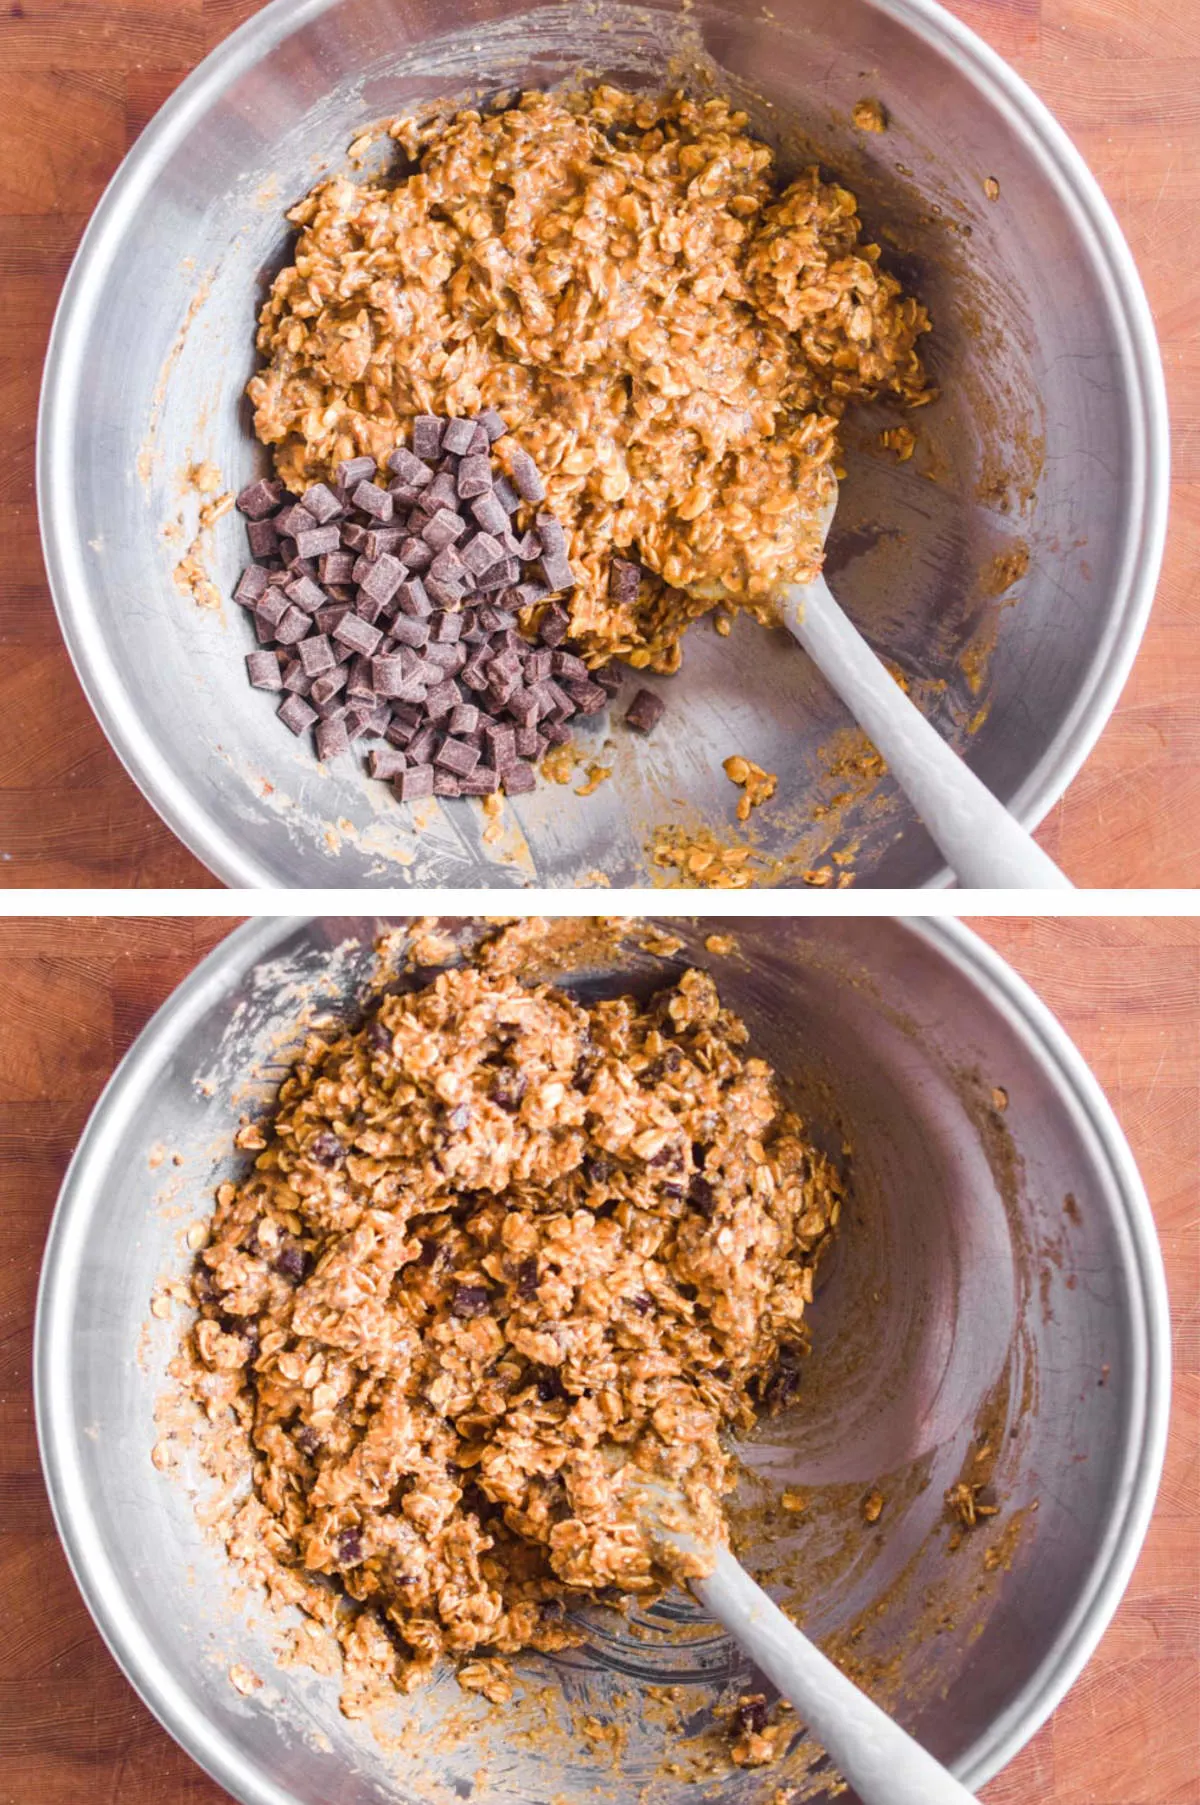 Two overhead images in one: 1. Chocolate chips are added to the mixture. 2. Chocolate chips are folded into the mixture. 